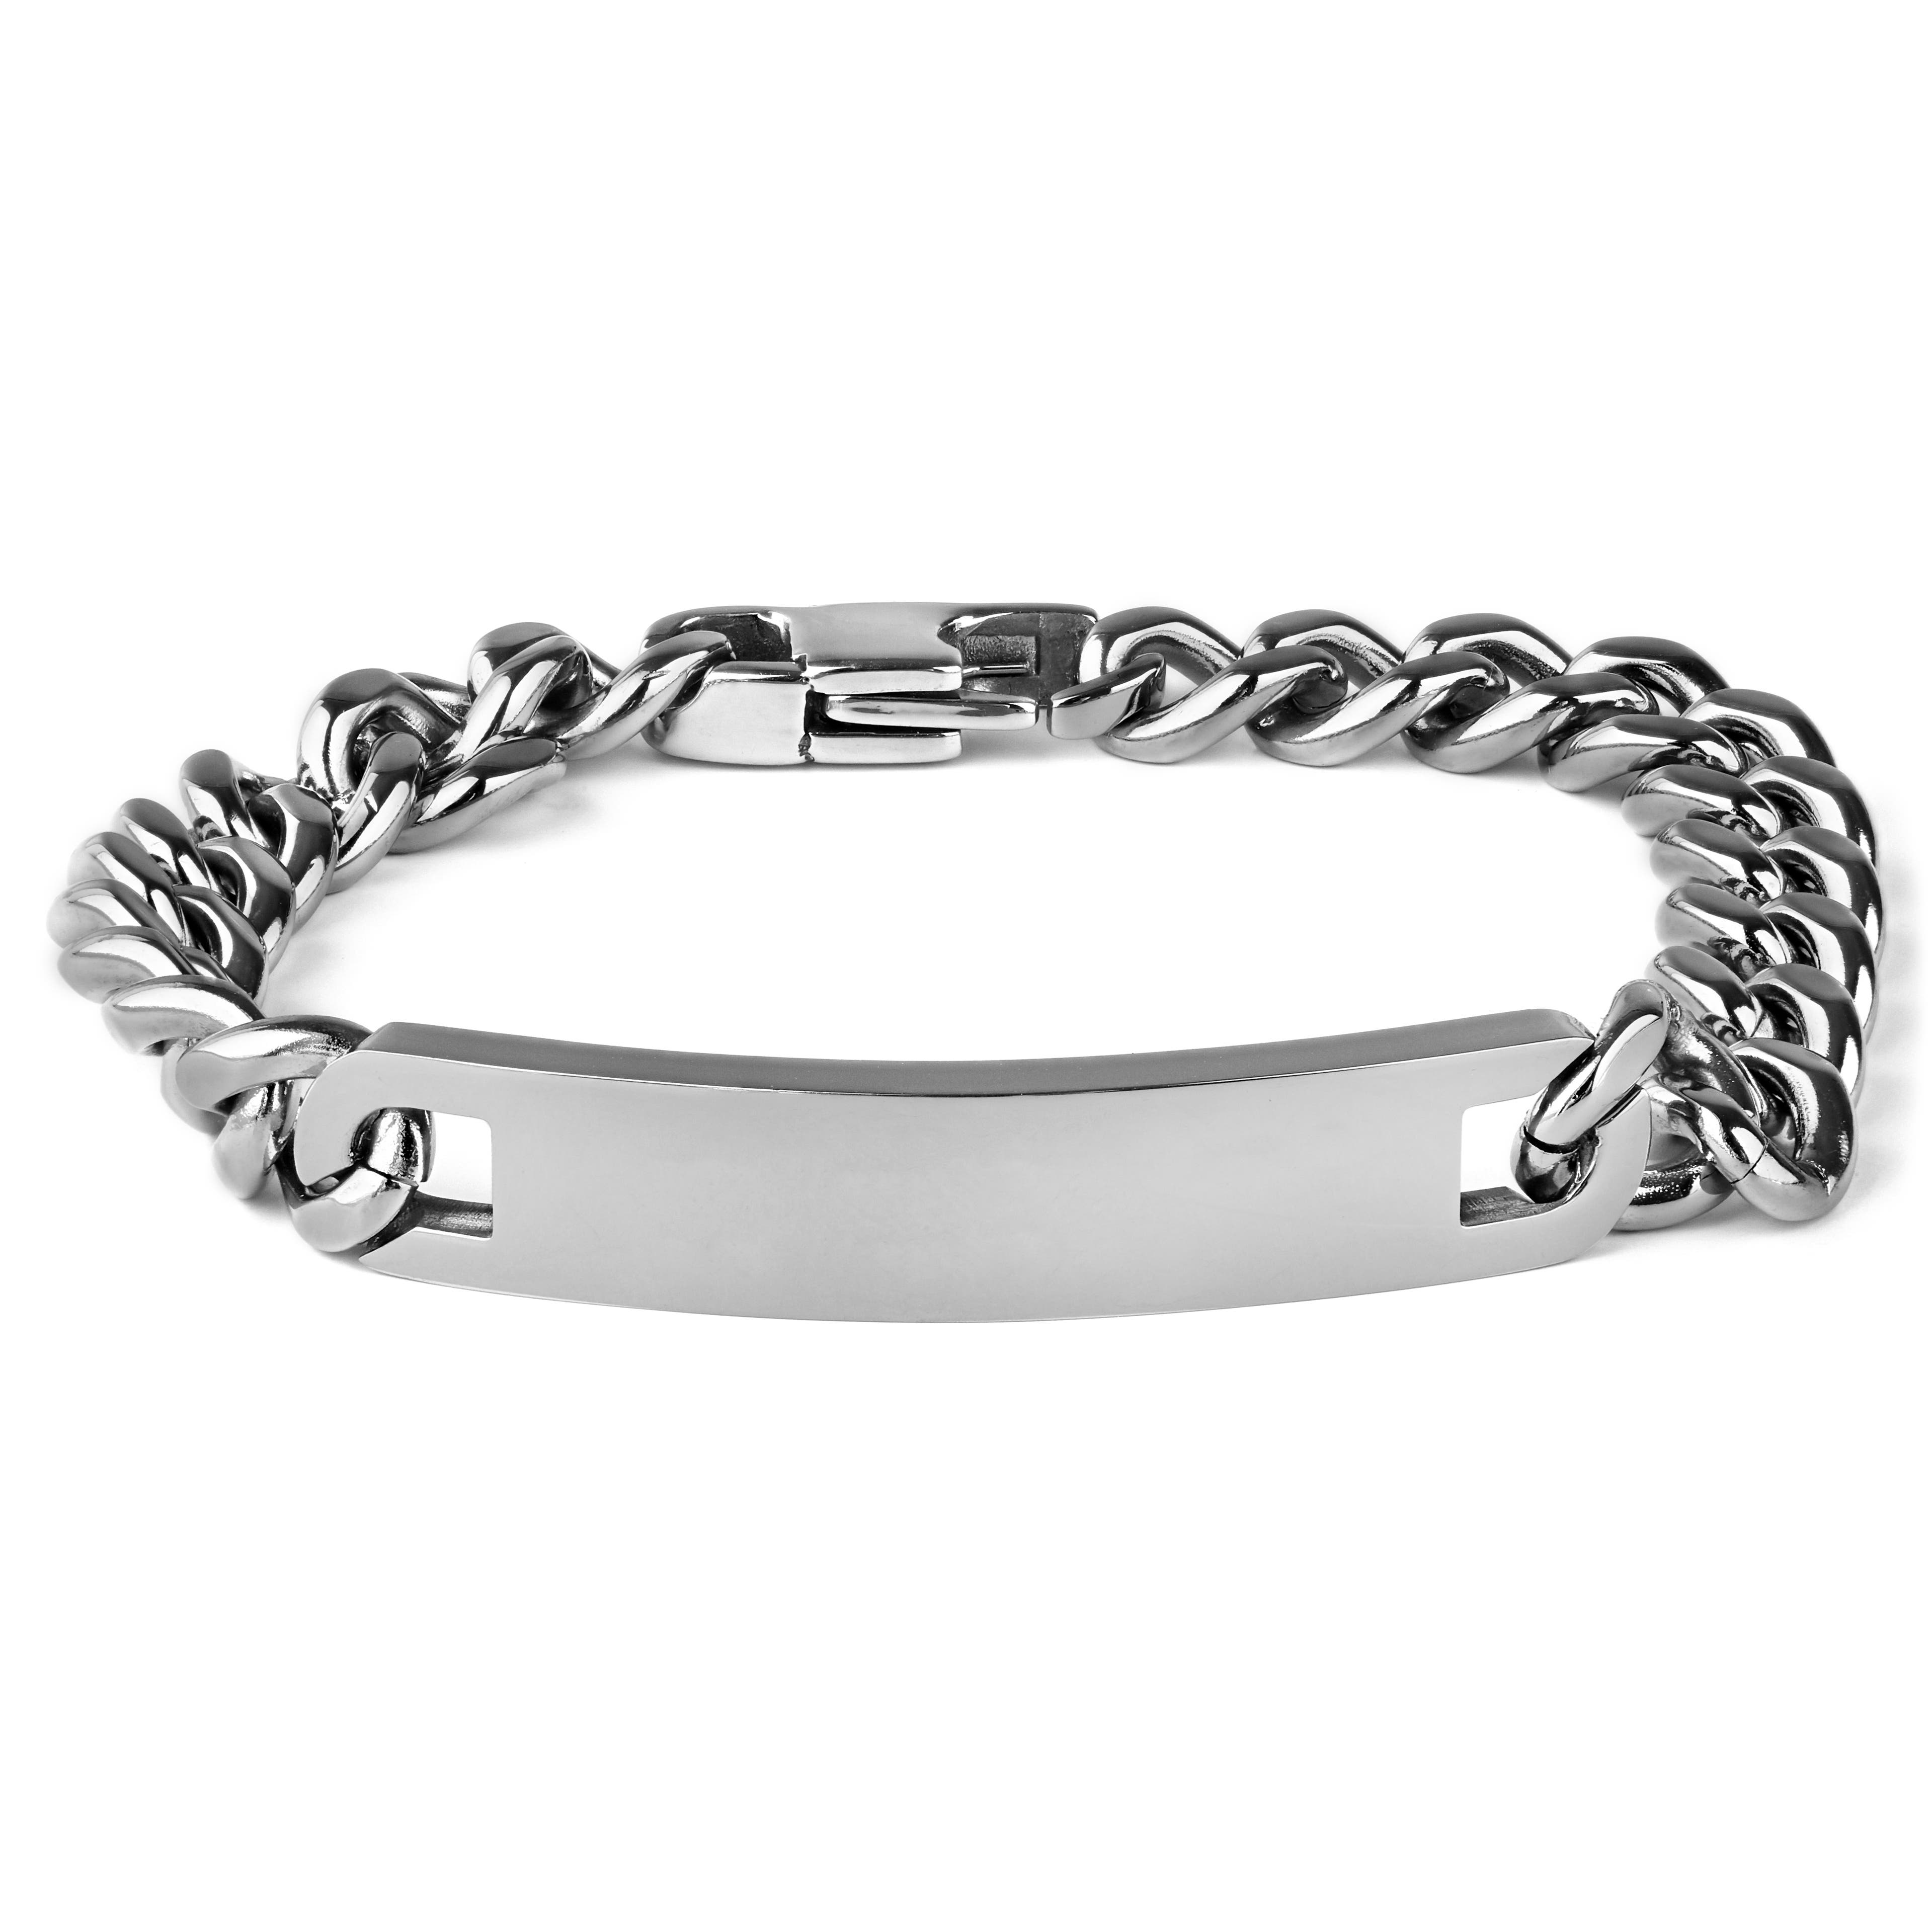 Chunky 10mm Silver-Tone Stainless Steel ID Bracelet